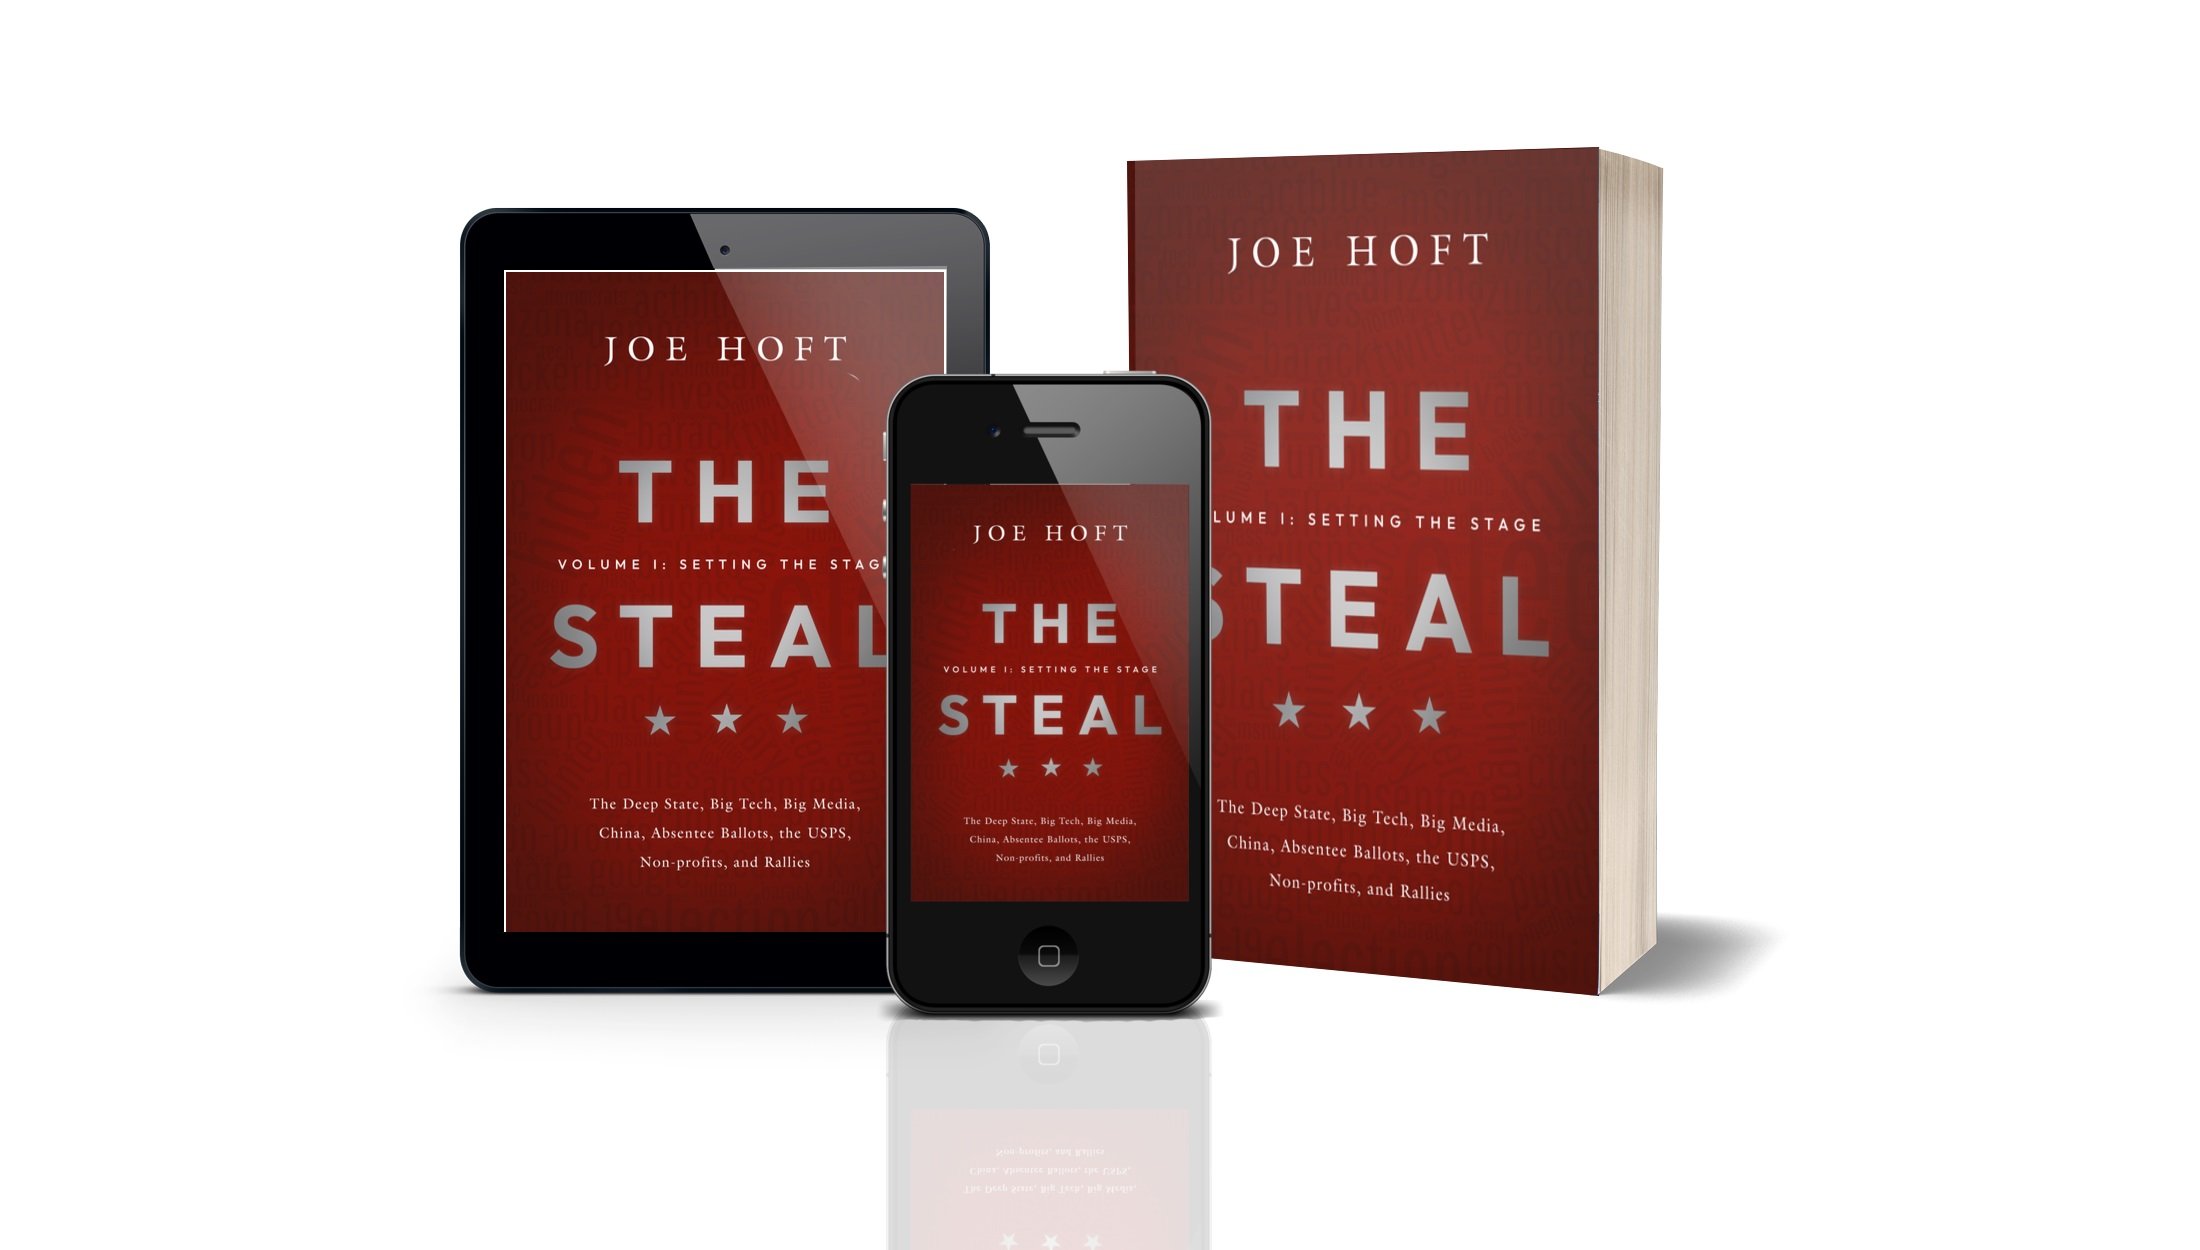 “The Steal – Volume I: Setting the Stage” Reaches Number One in Multiple Amazon Categories